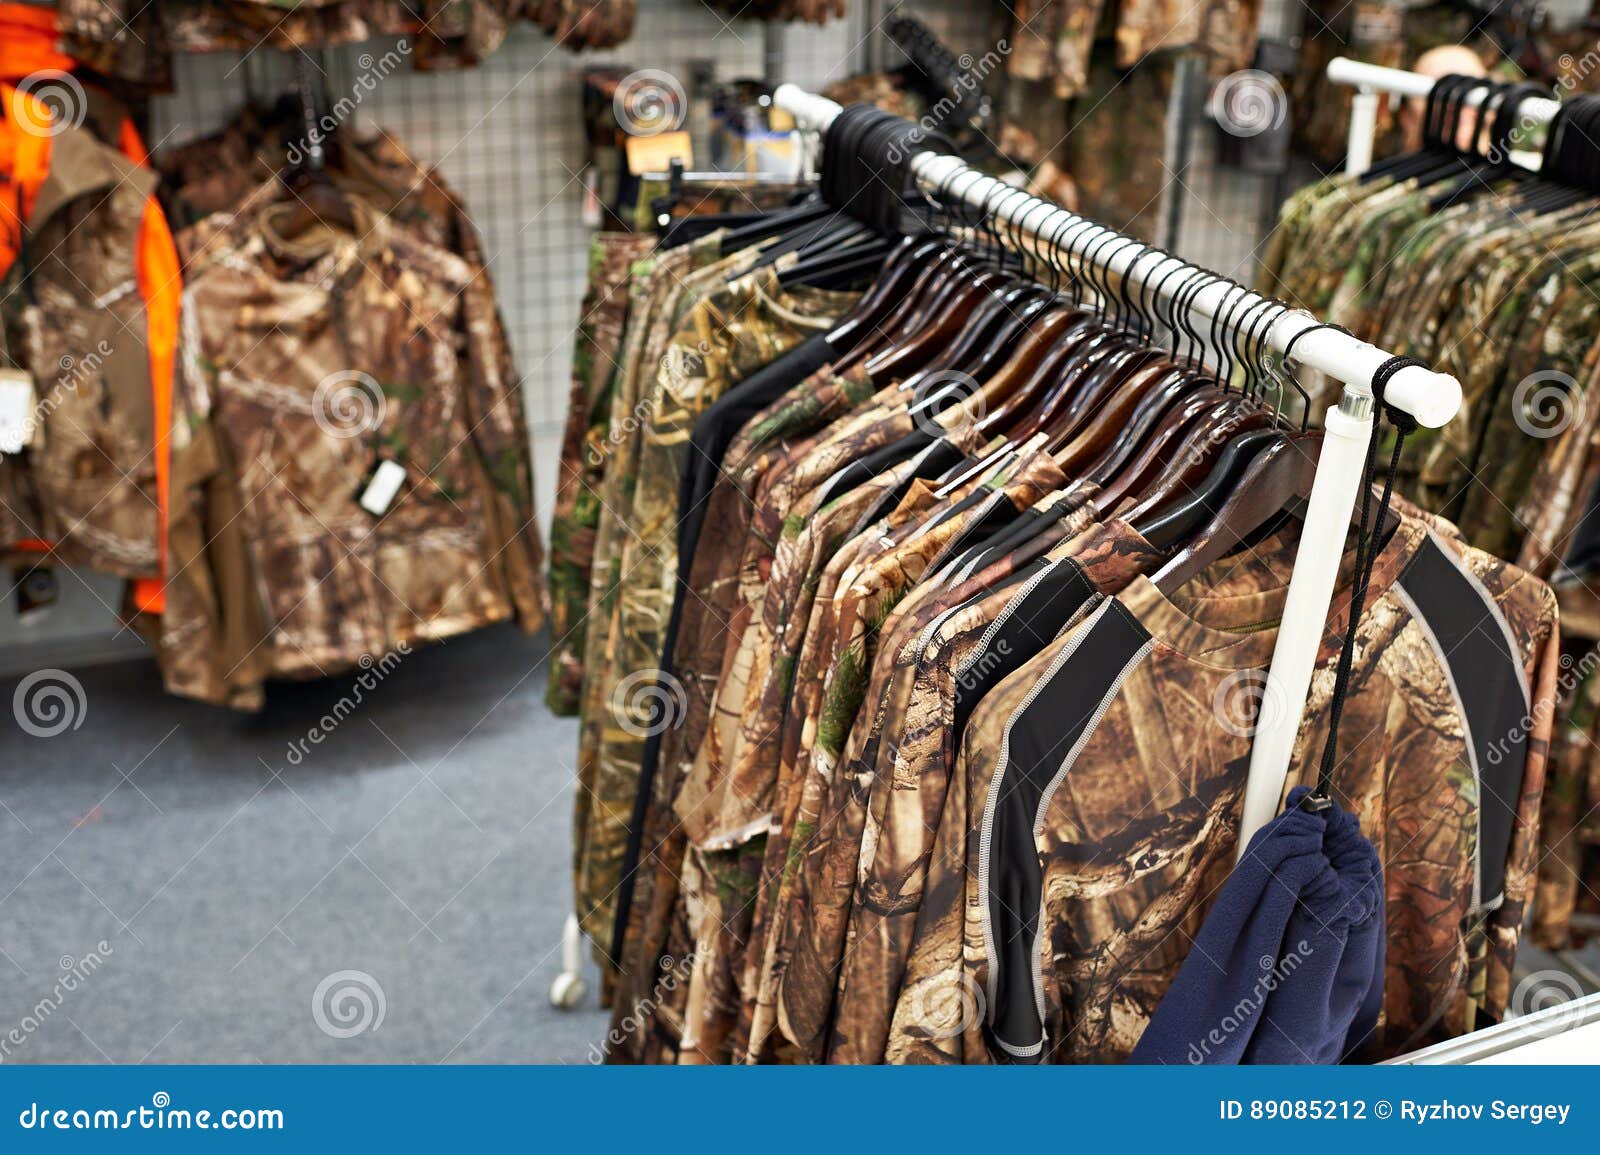 https://thumbs.dreamstime.com/z/clothes-hunting-fishing-store-89085212.jpg